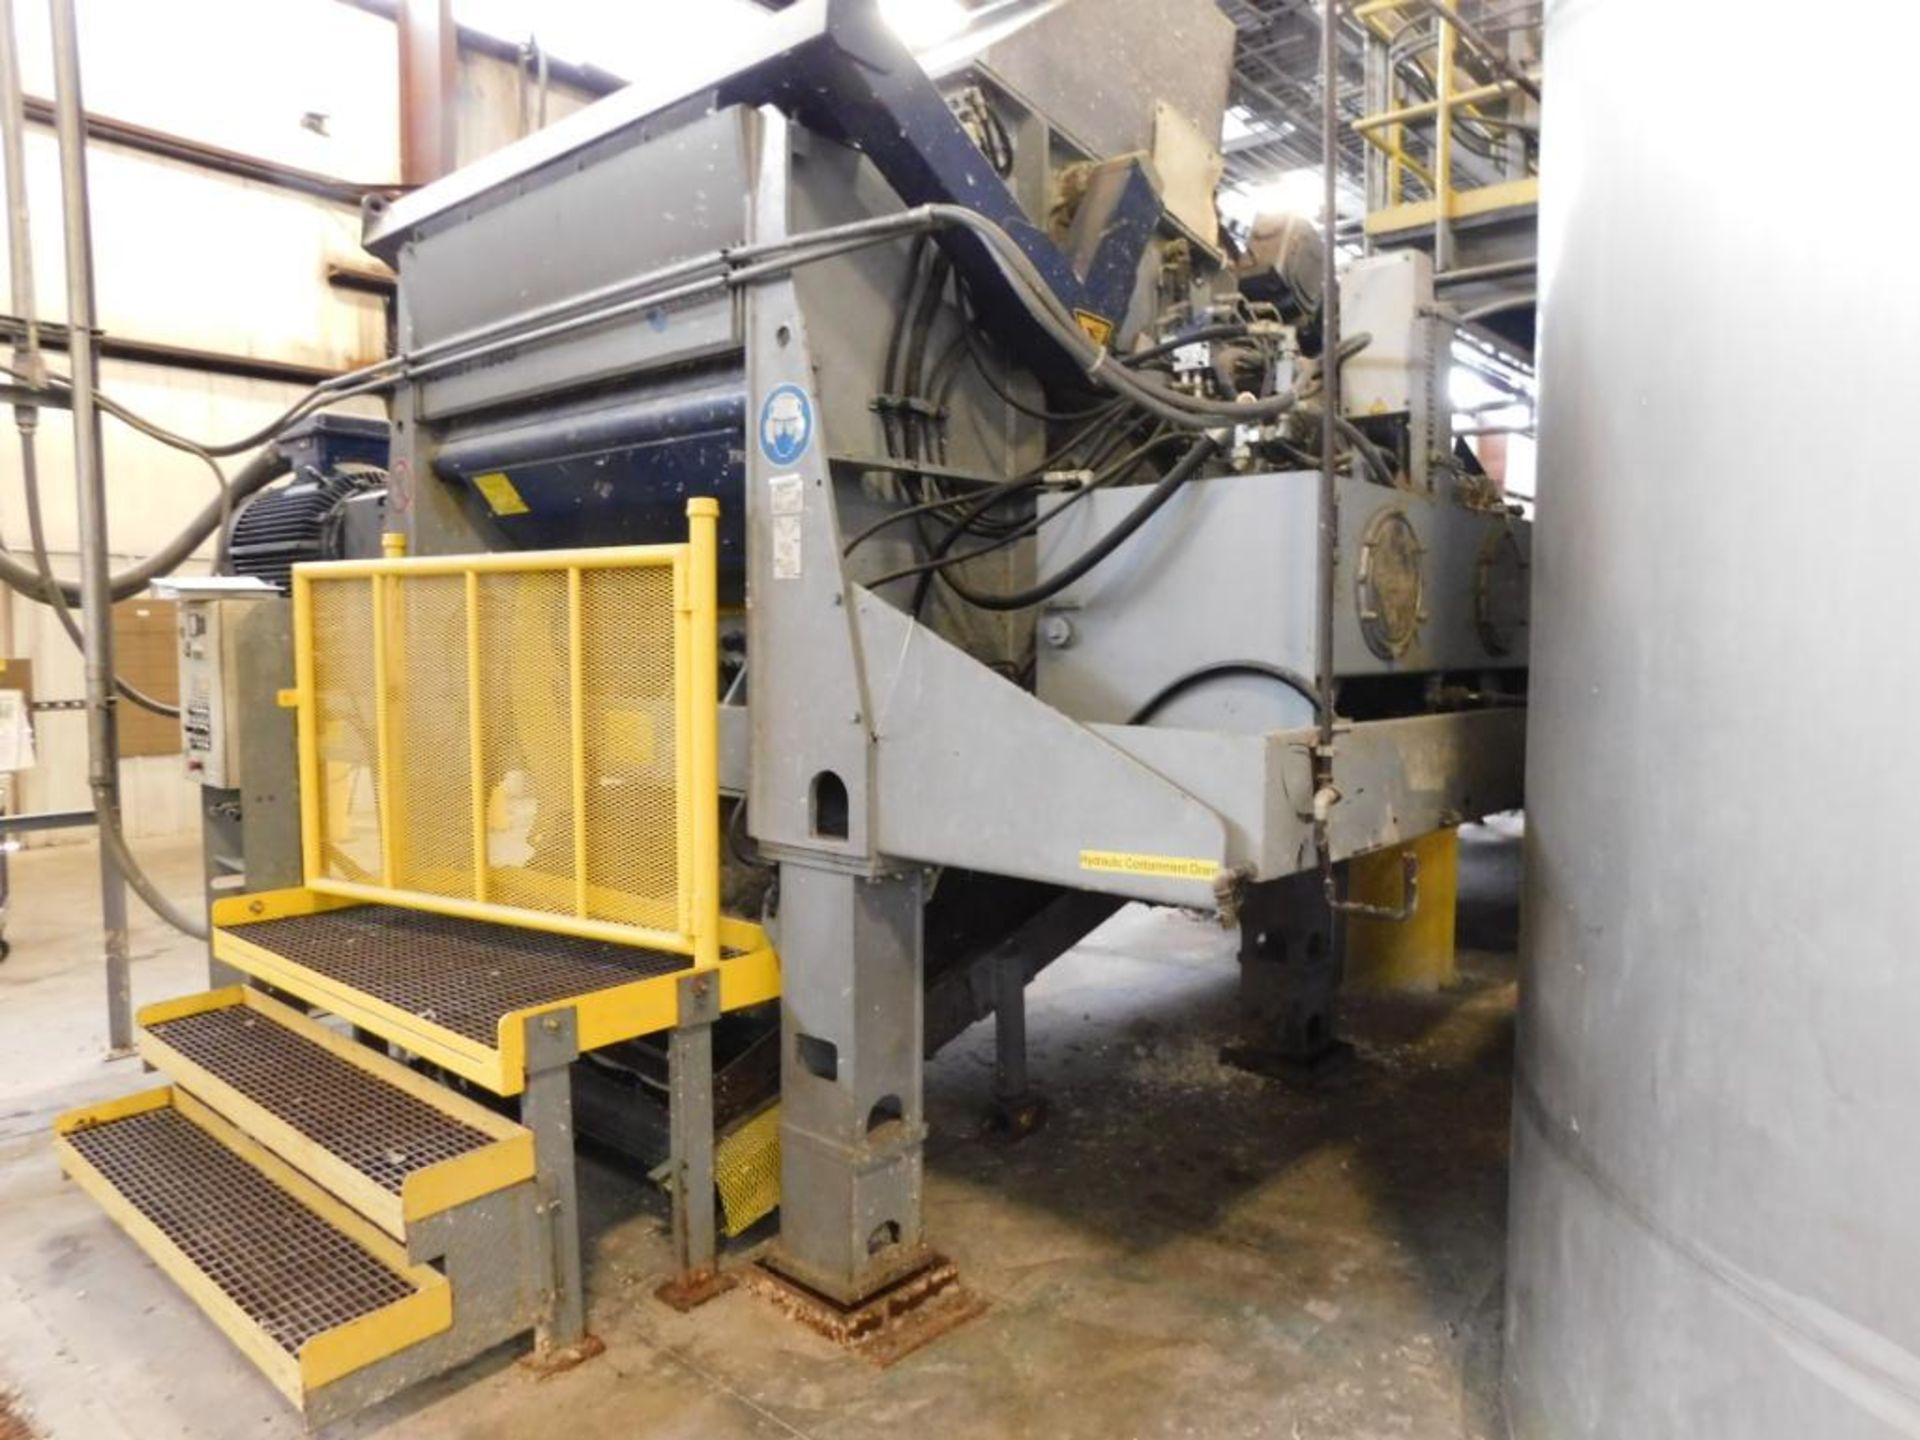 LOT: Shredder Line with Infeed & Outfeed Conveyors consisting of Lots #45, #46, #47, #48 - Image 5 of 10